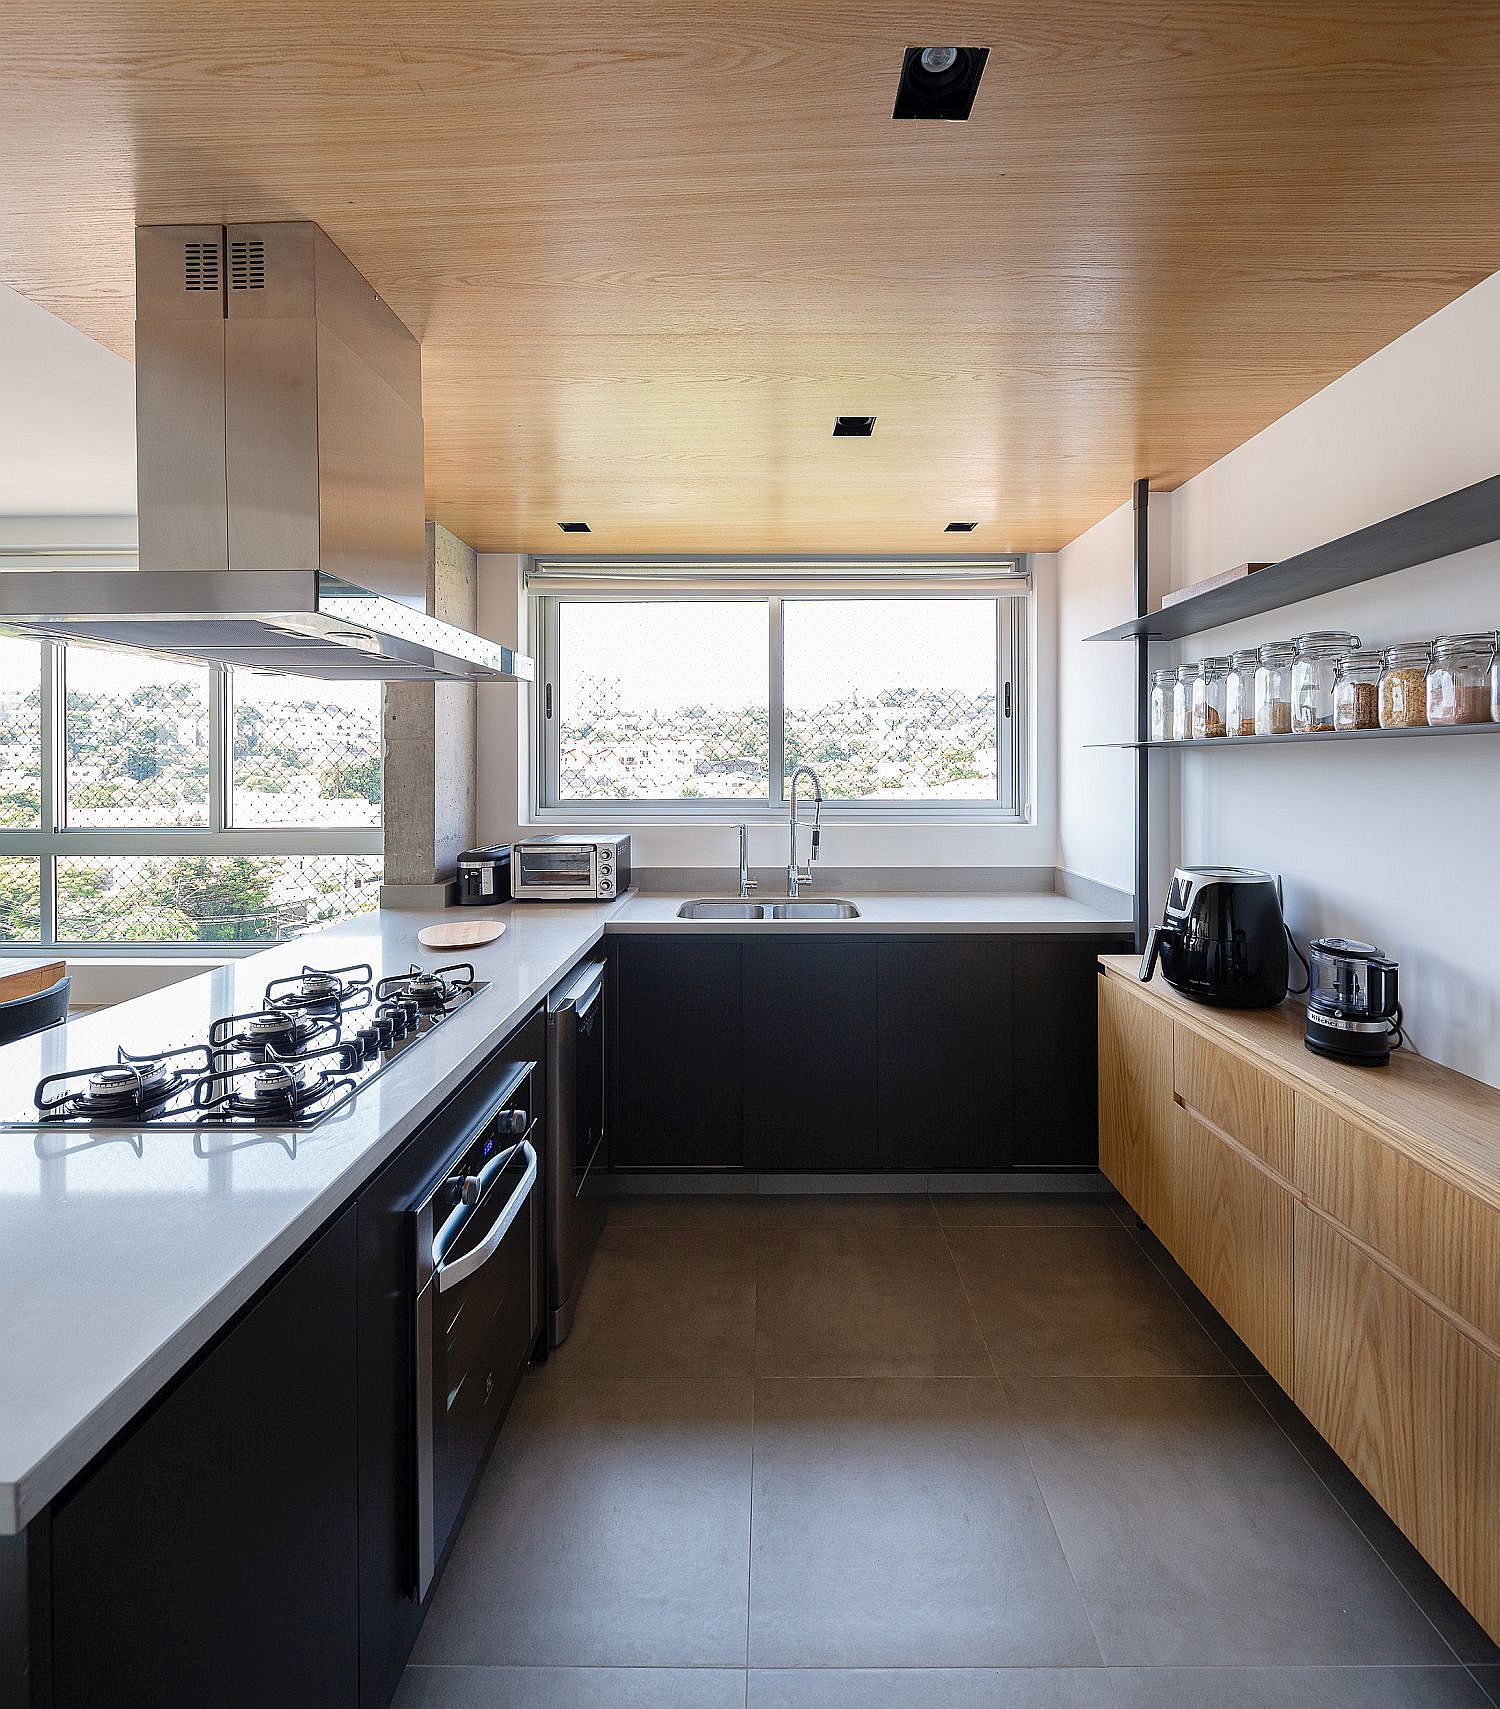 Wooden ceiling and shelves bring warmth to the spacious modern kitchen